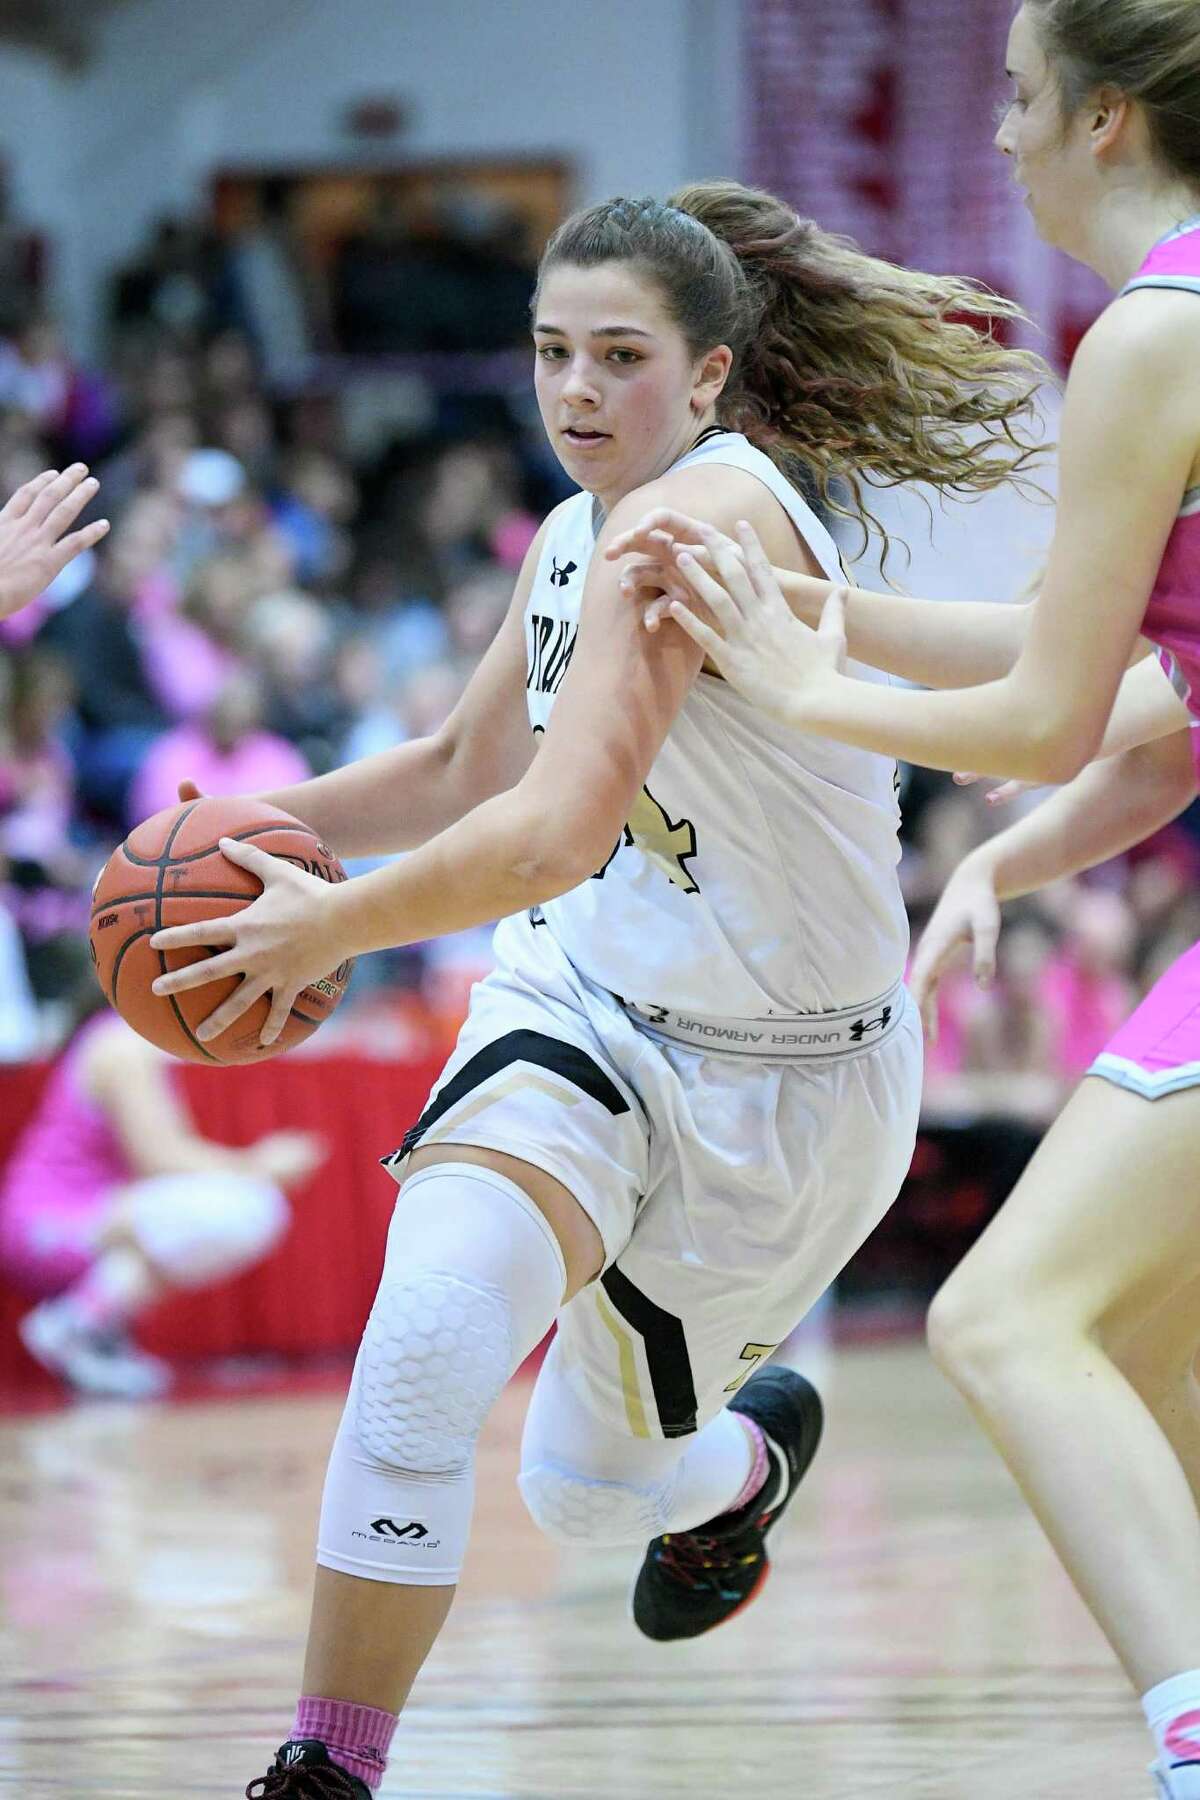 Trumbull High’s Cassi Barbato against St. Joseph in the first game of the Playing for a Cure doubleheader at Fairfield University’s Alumni Hall, Friday, Feb. 7, 2020.